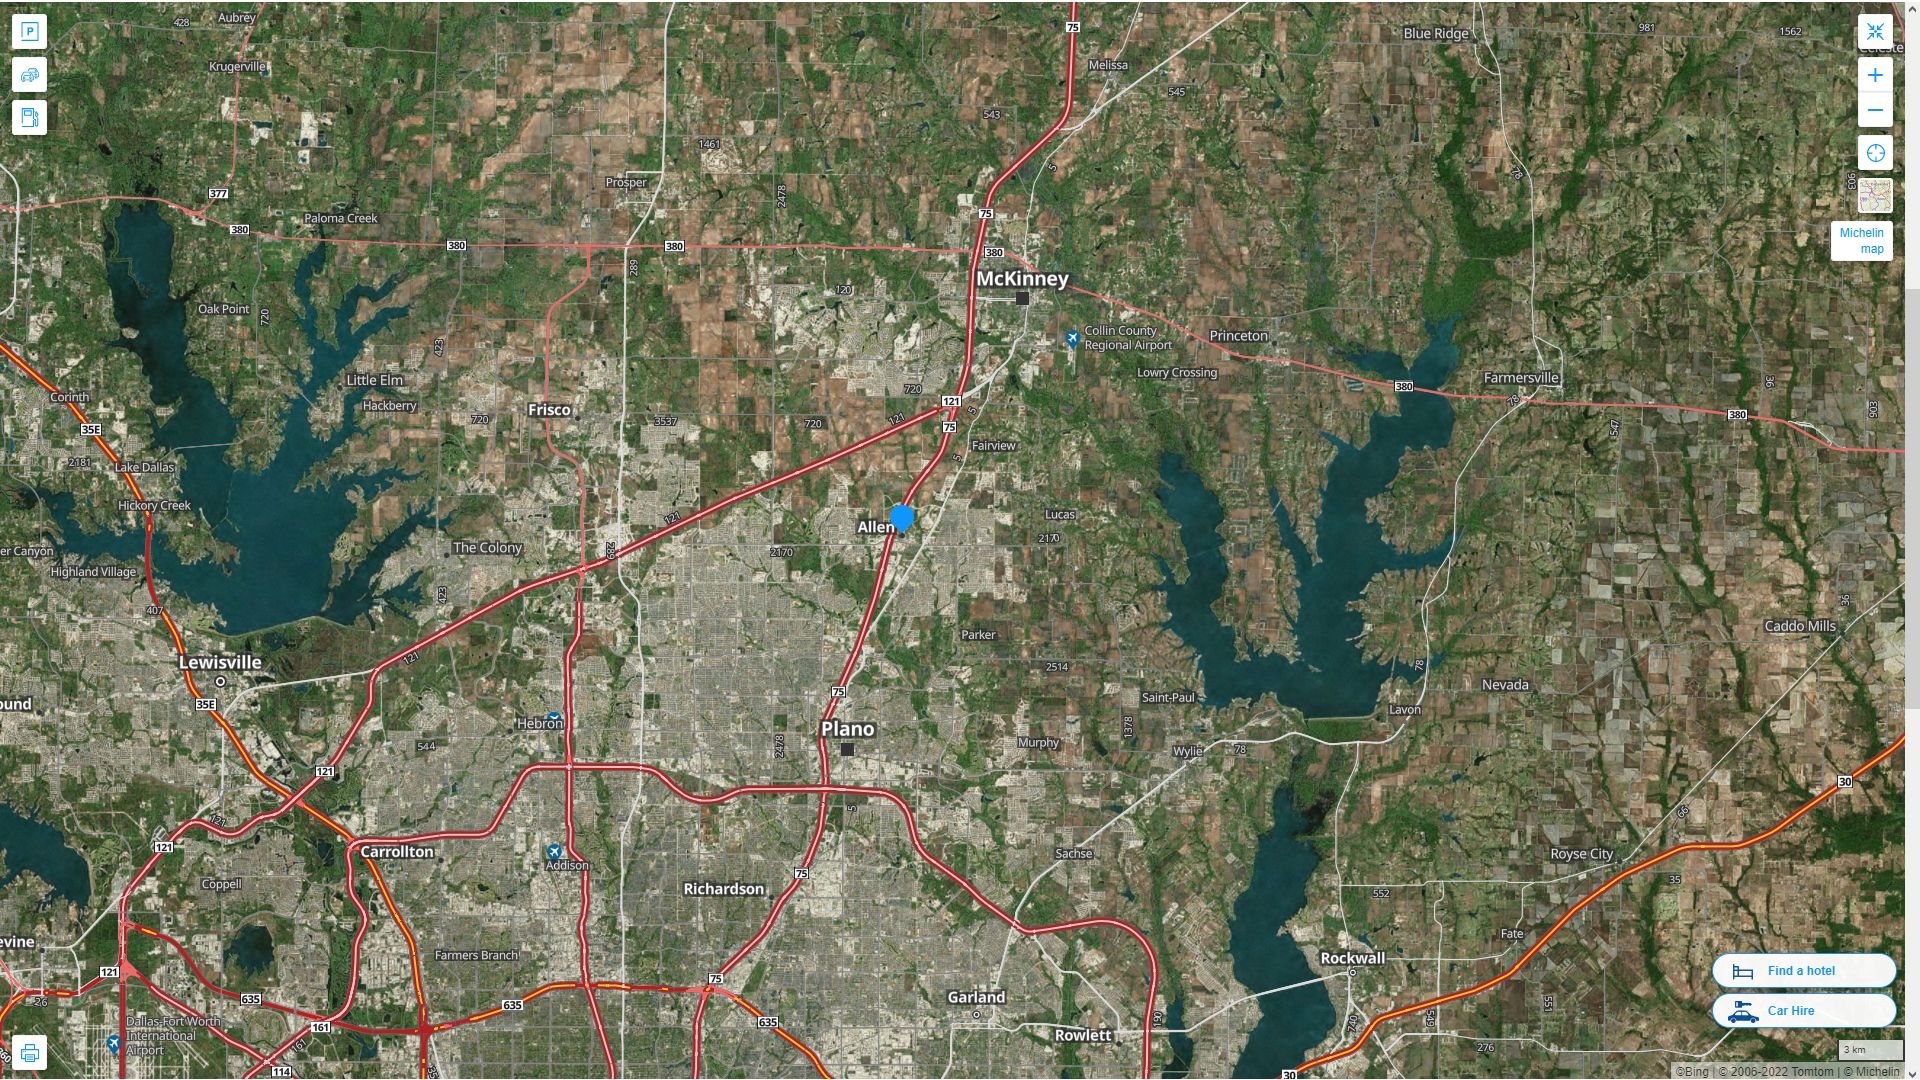 Allen Texas Highway and Road Map with Satellite View